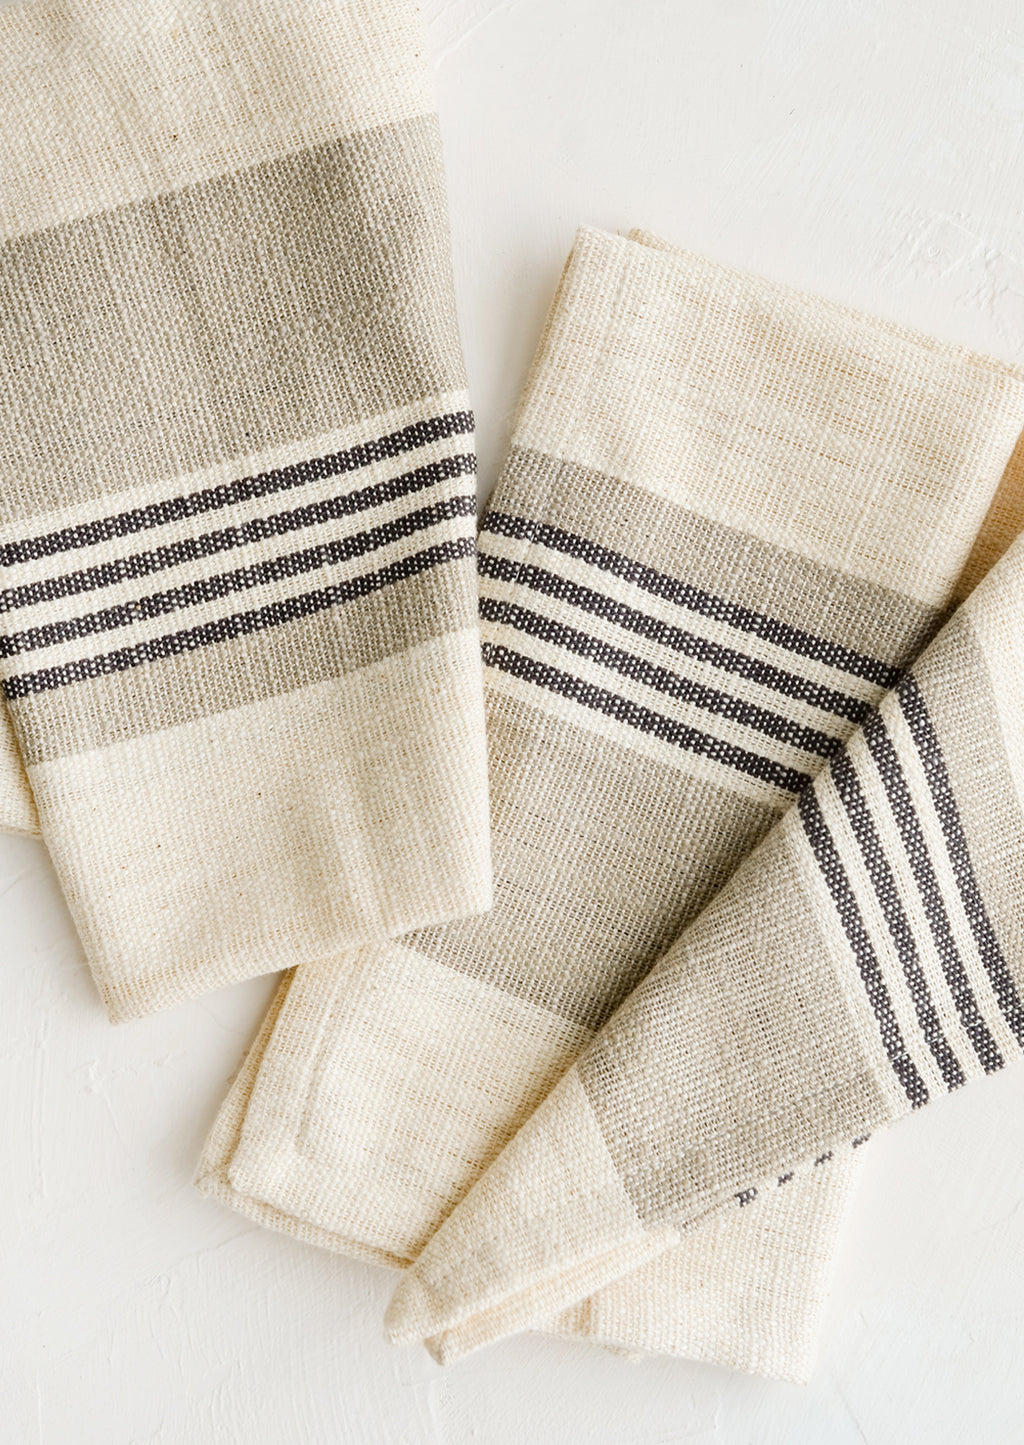 Tan / Black Stripe: A pair of folded napkins in ivory with black and tan striped band across middle.